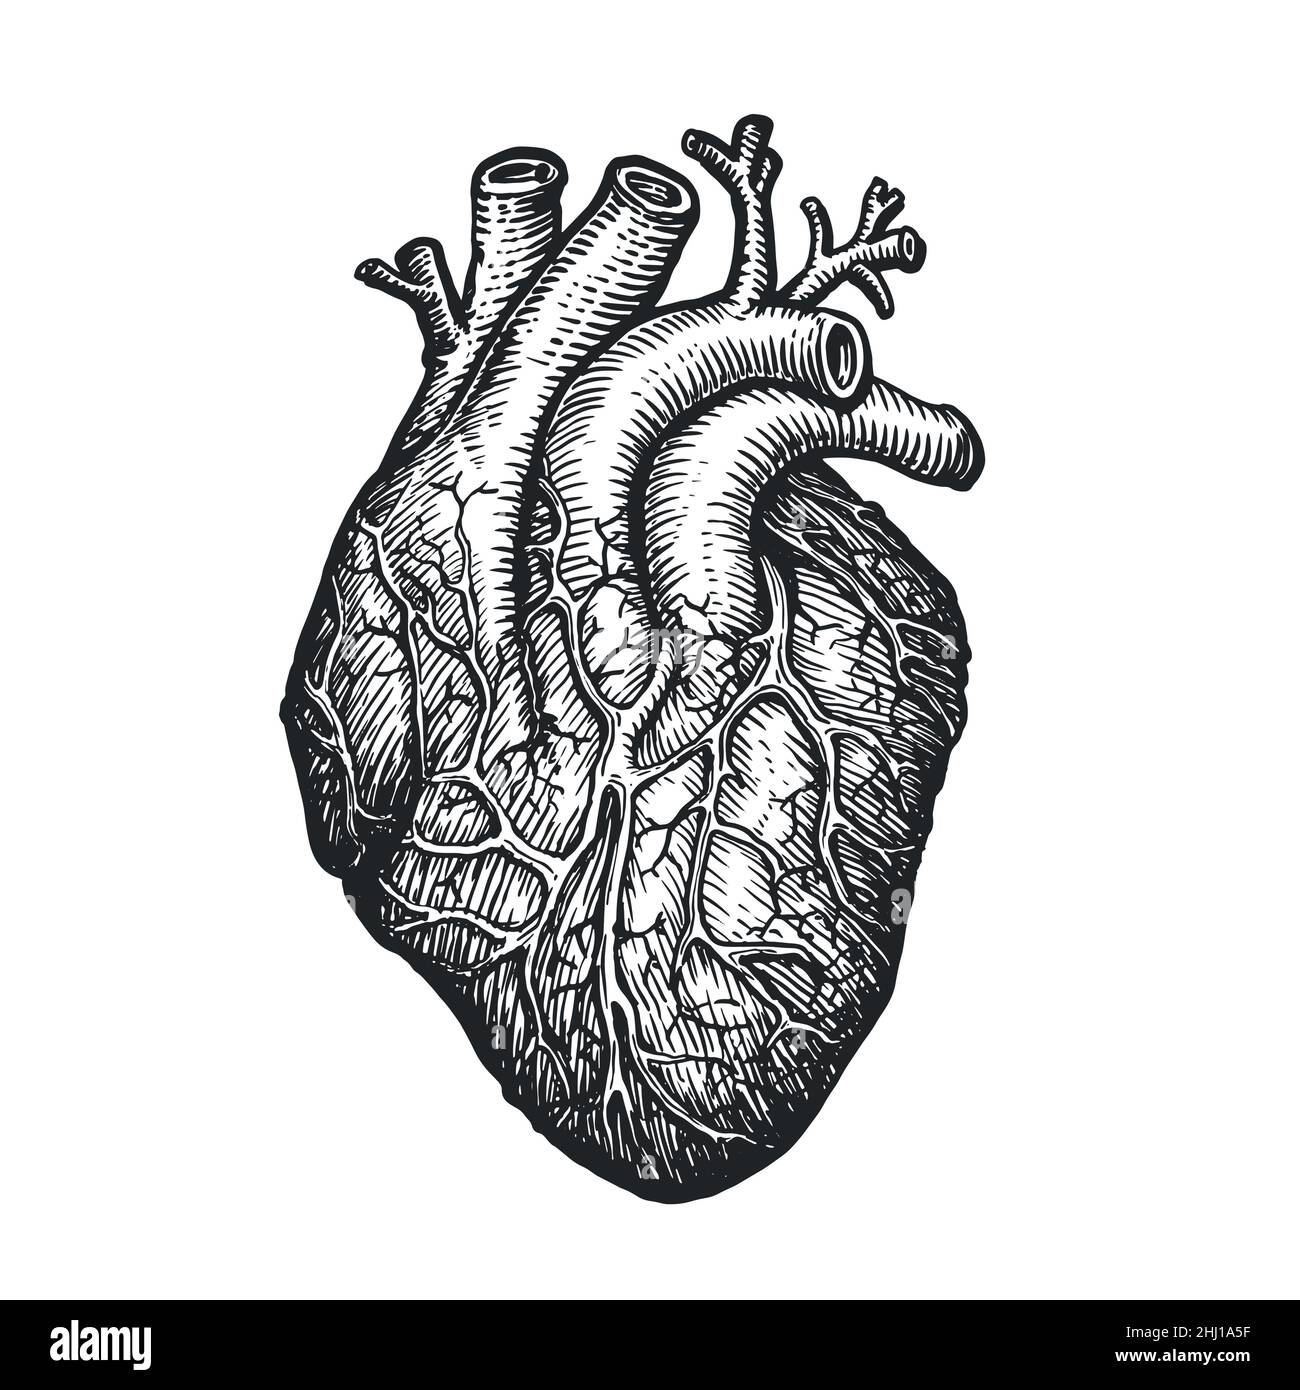 Realistic heart sketch Stock Vector Images - Page 2 - Alamy